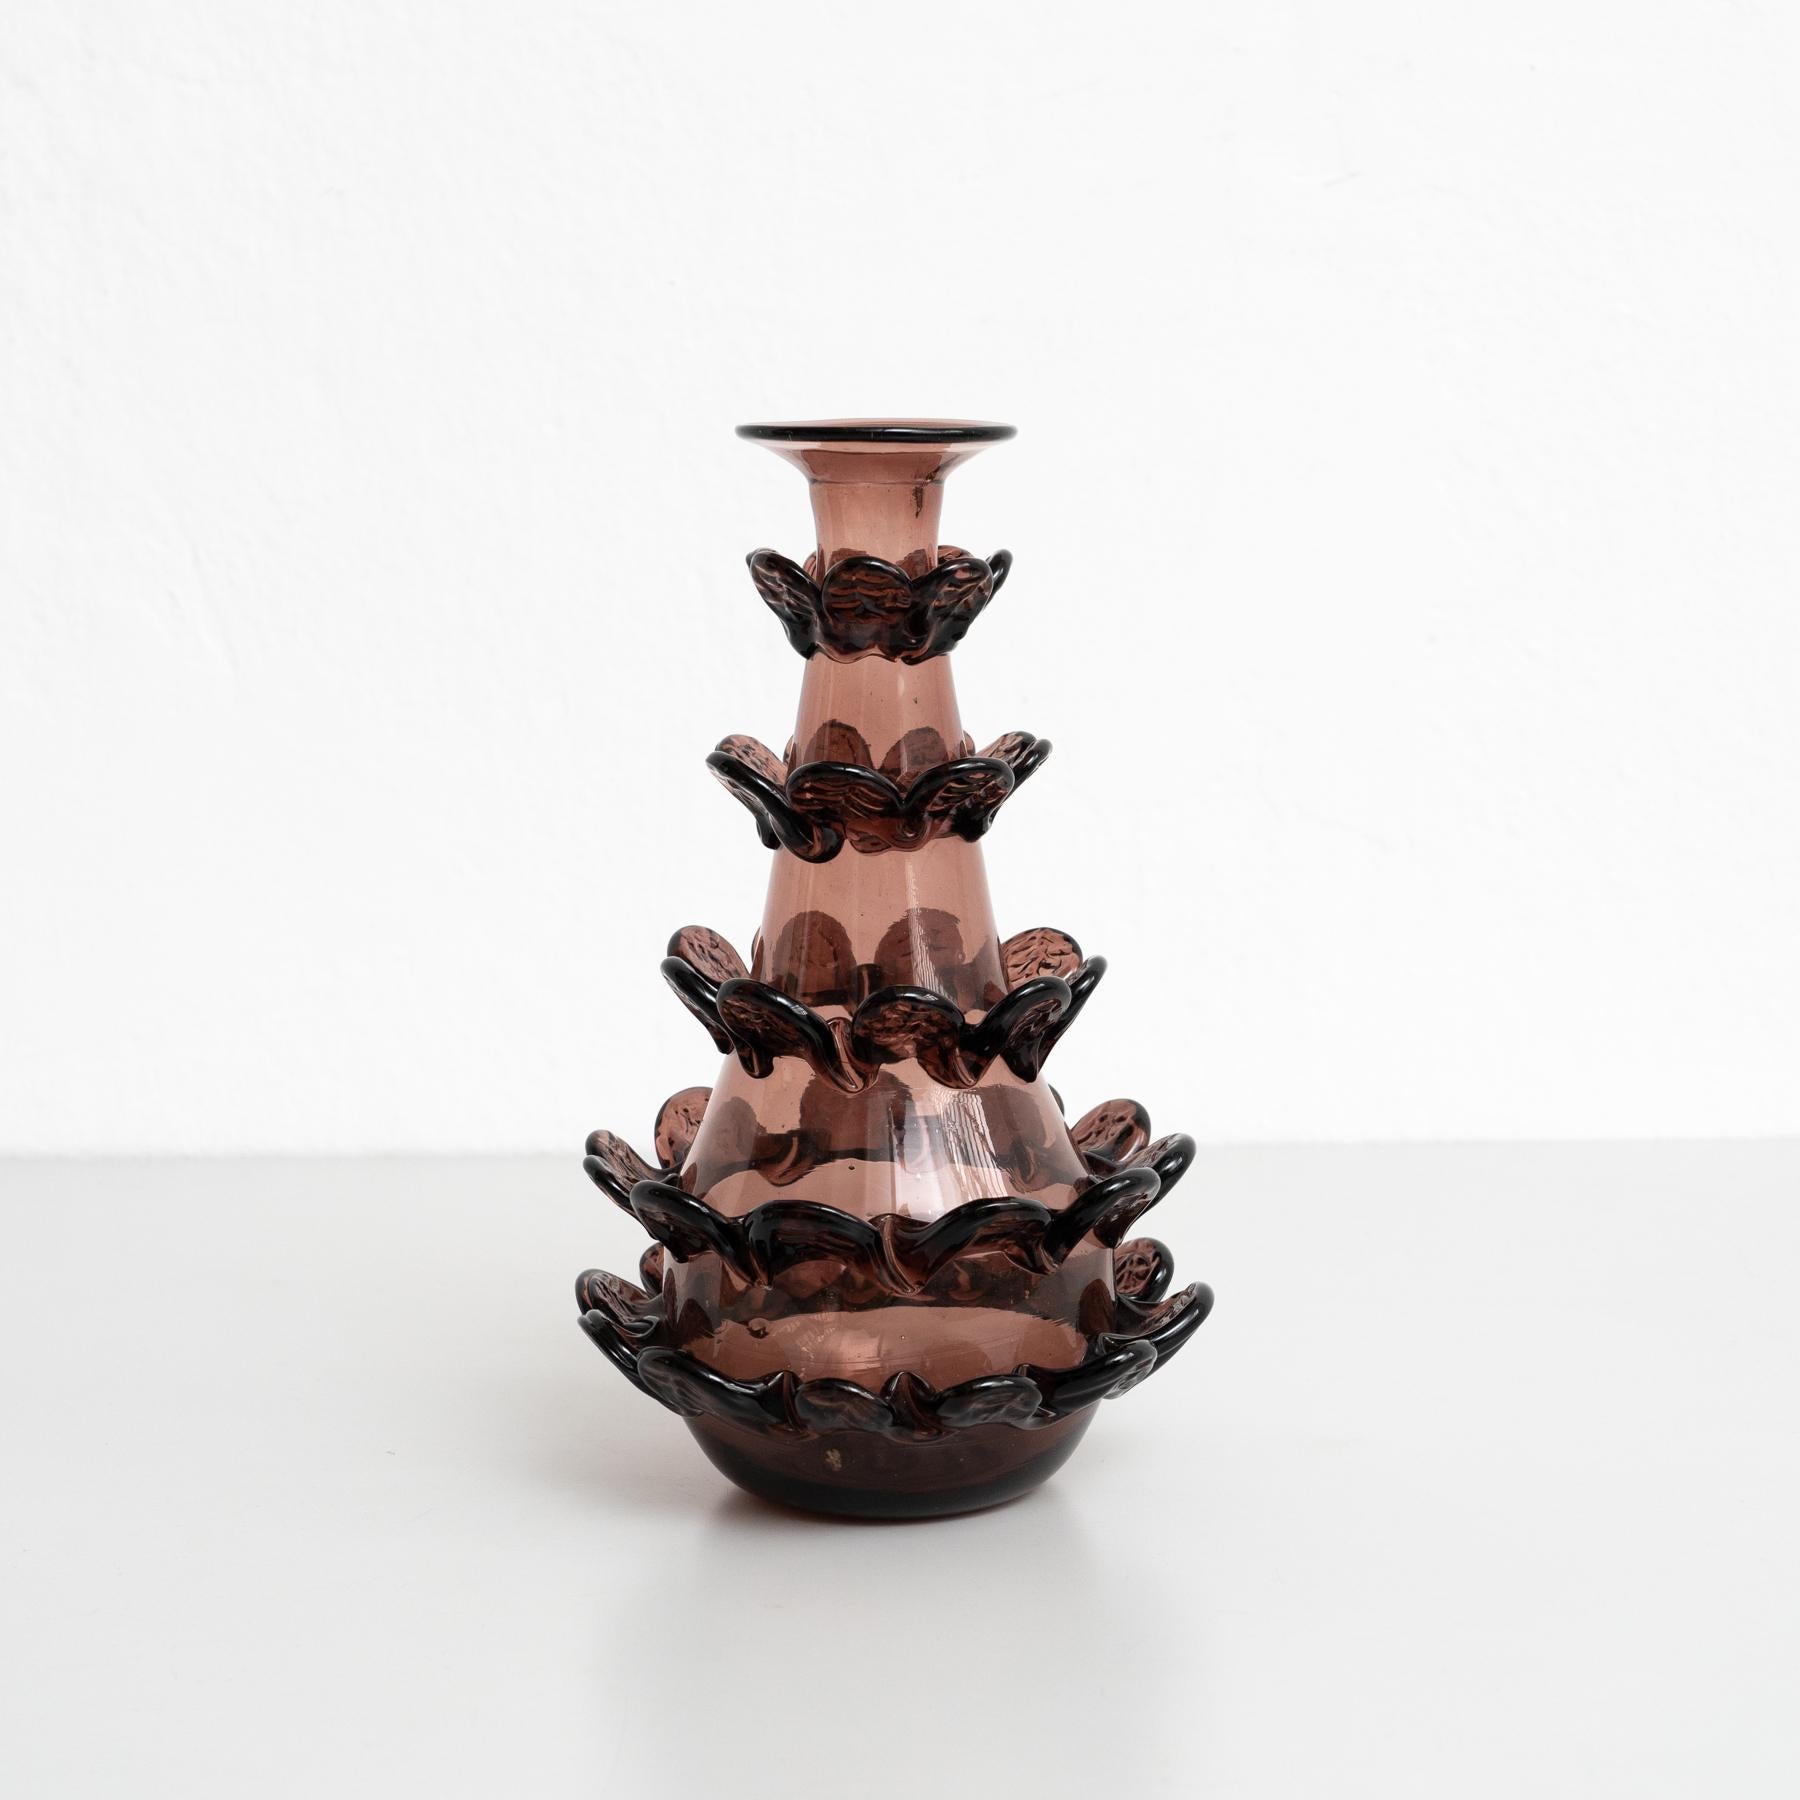 Exceptional Blown Glass Vase - Circa 1940 - Spanish Craftsmanship In Good Condition For Sale In Barcelona, ES